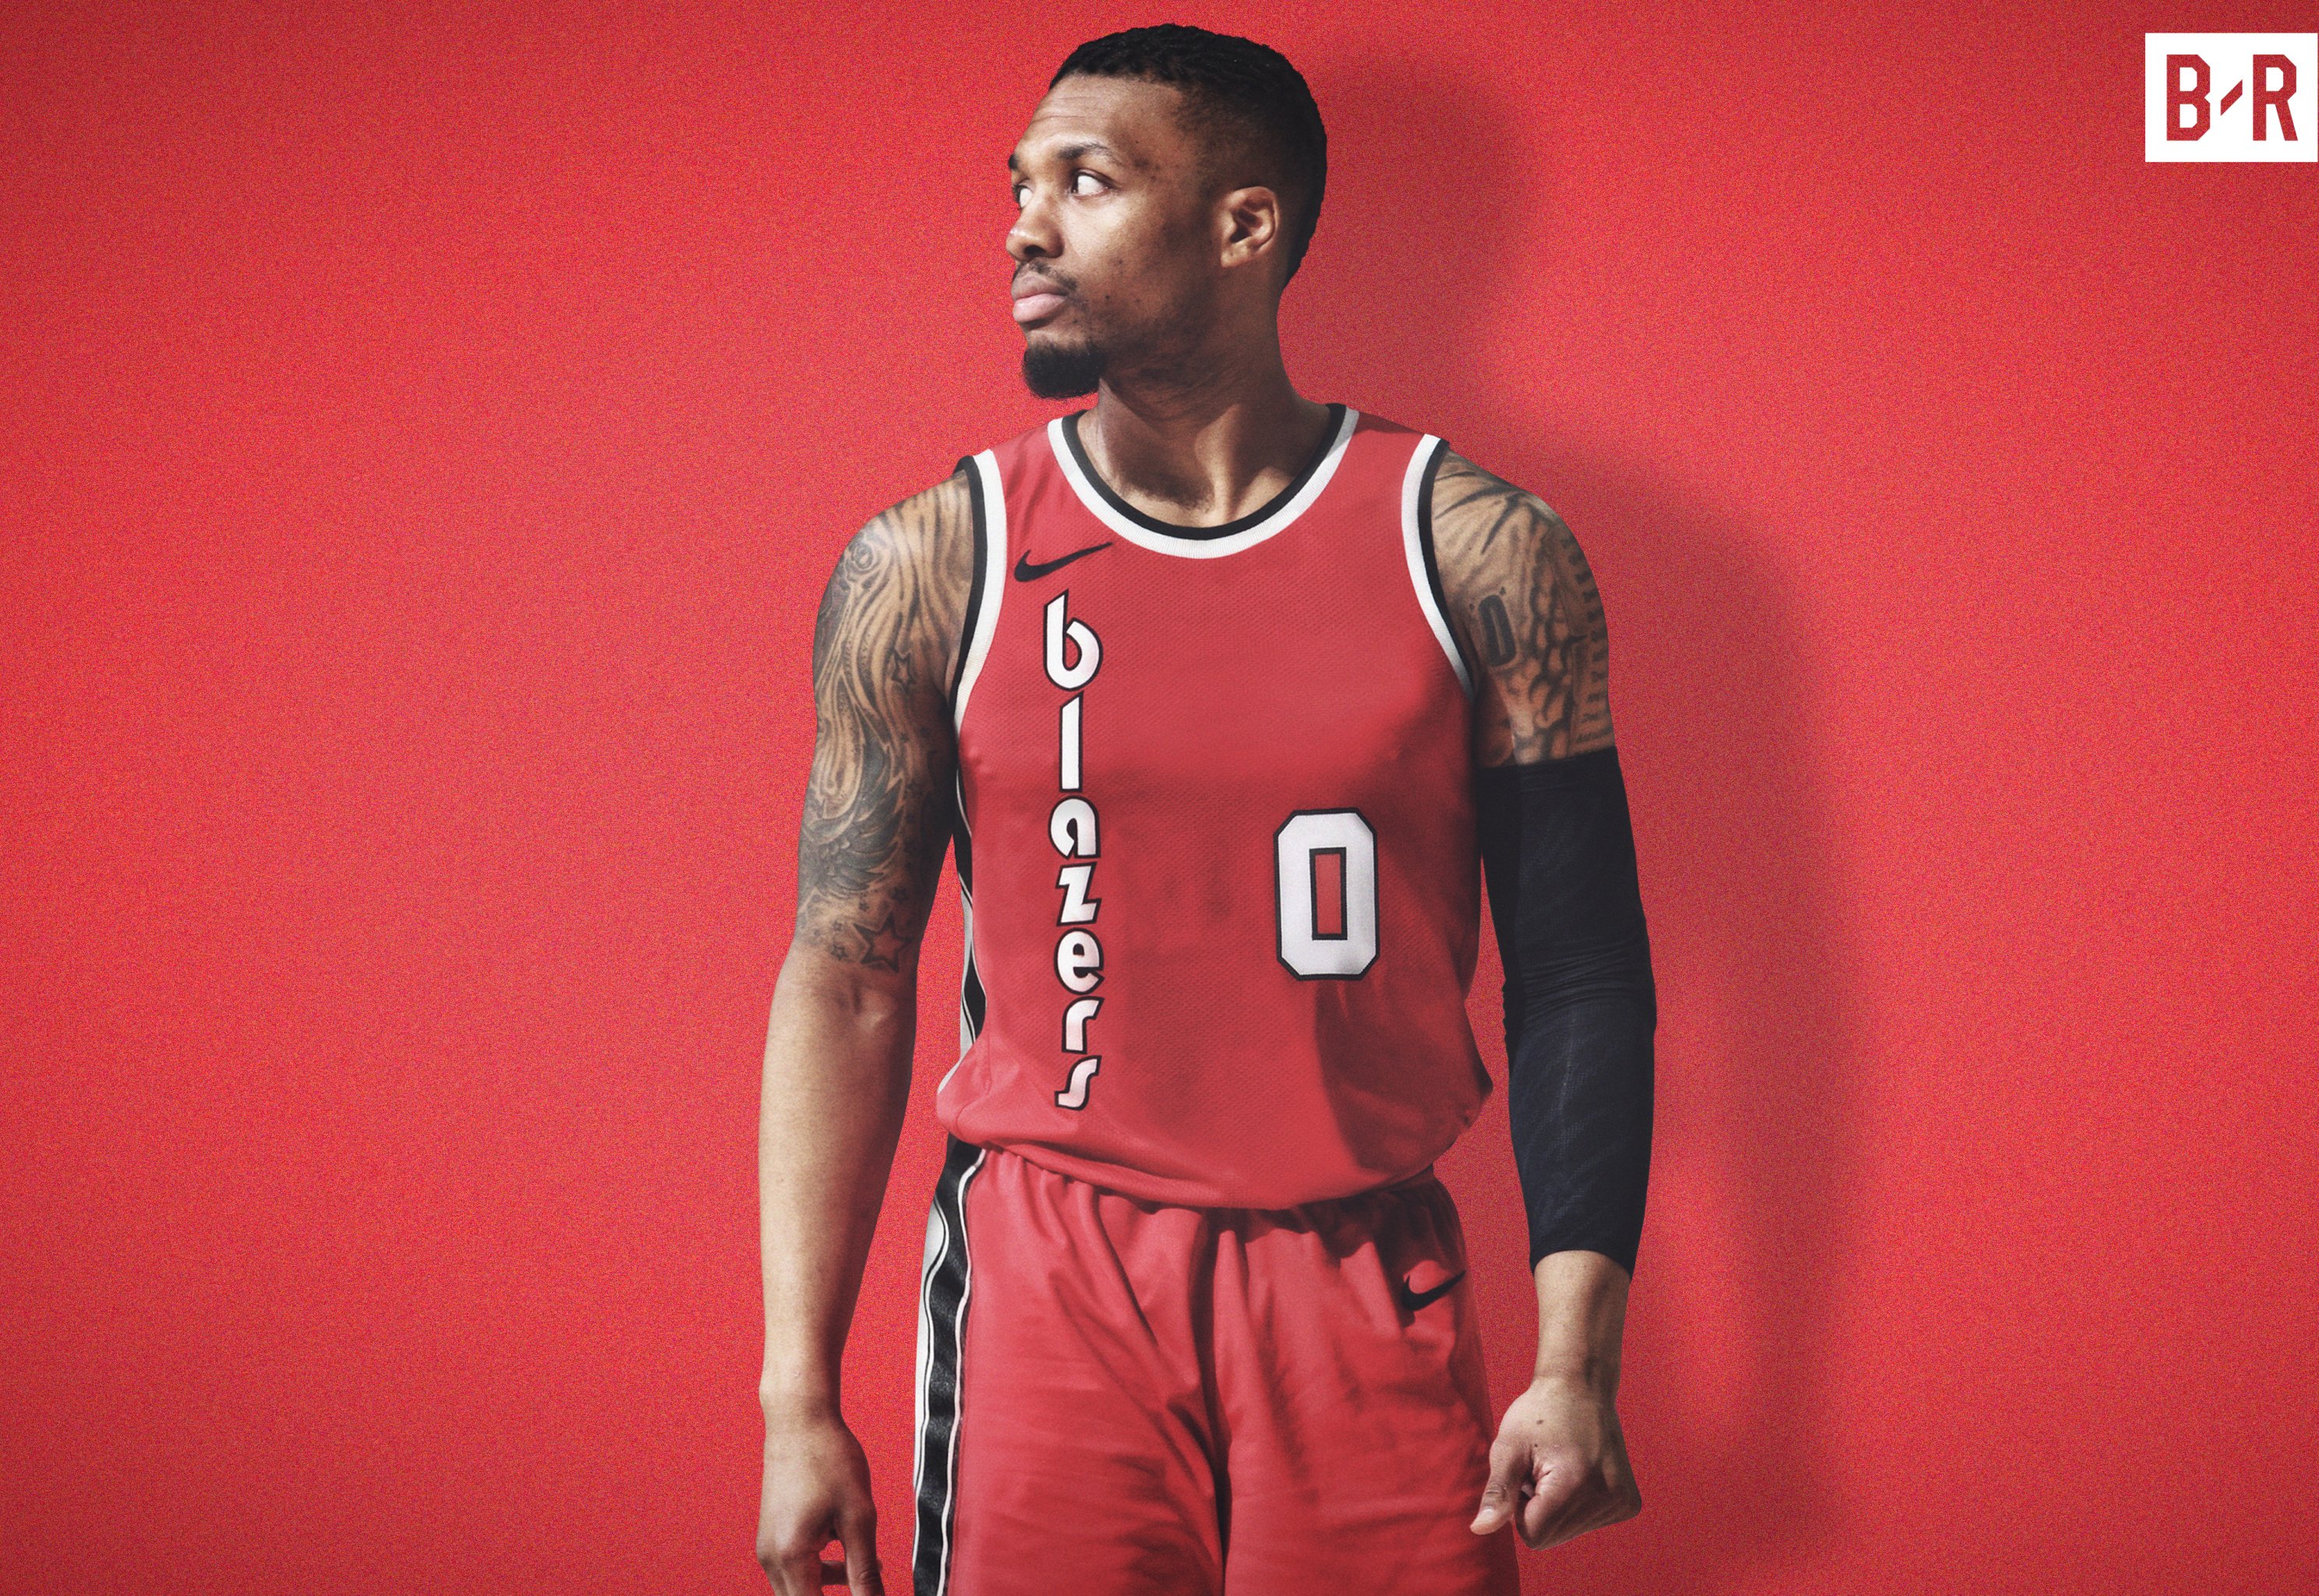 adidas Rolls Out Retro NBA Uniforms - WearTesters